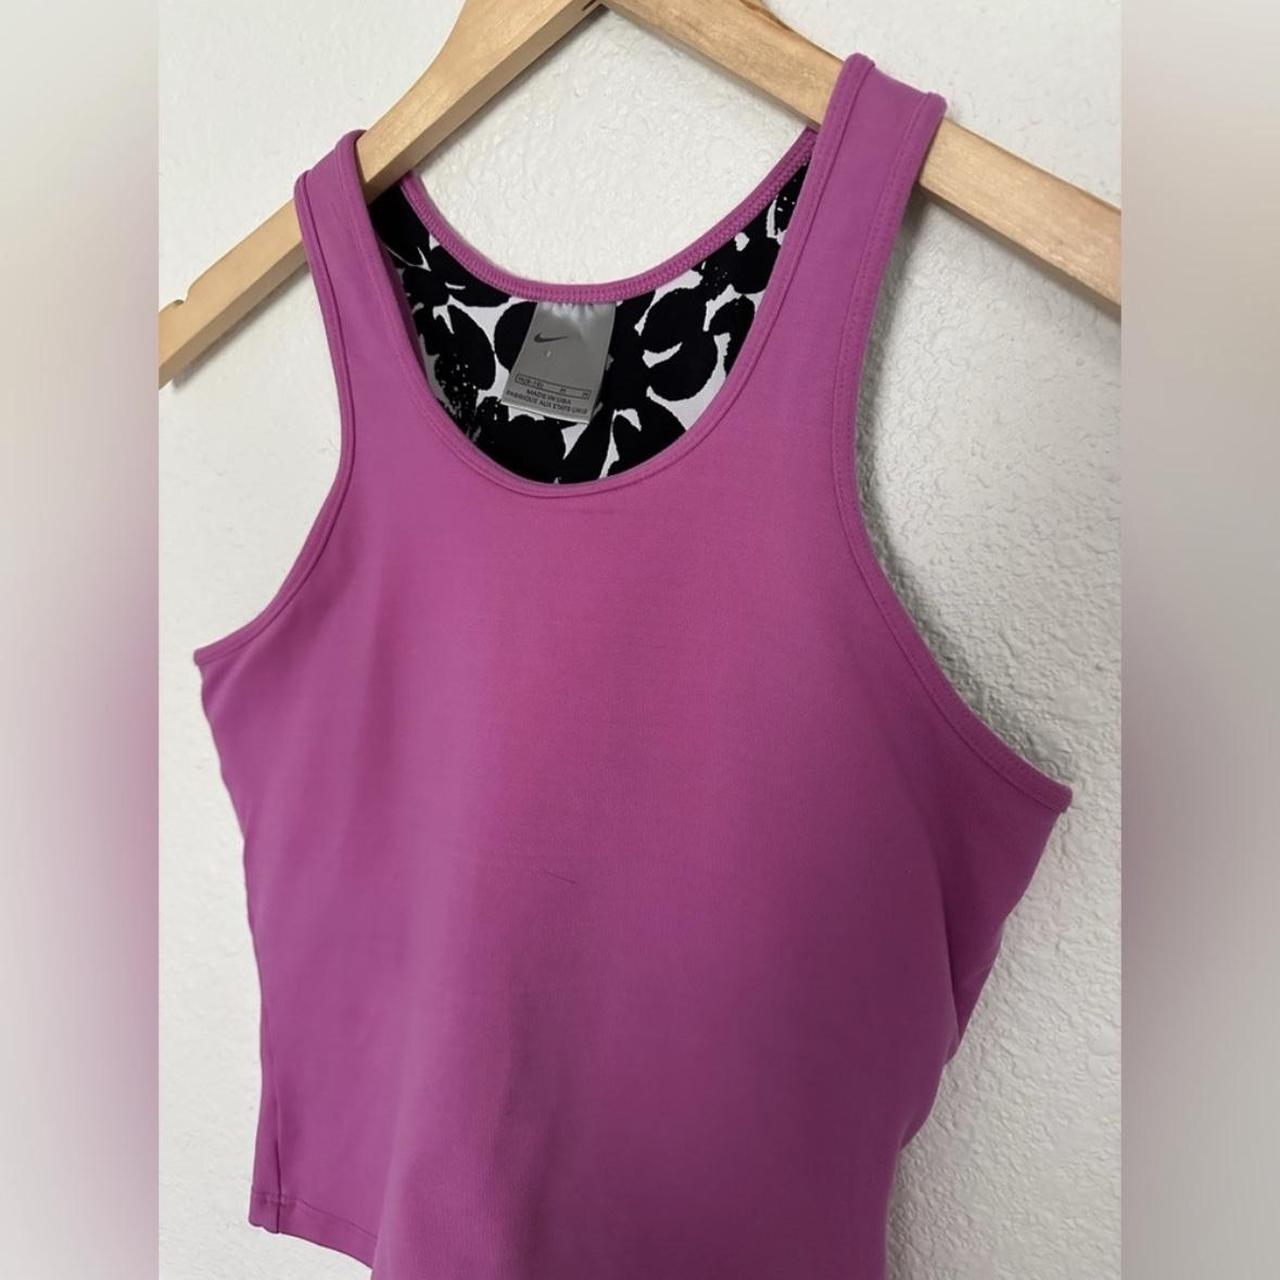 Nike Women's Yoga Cropped Active Tank Top with Built - Depop